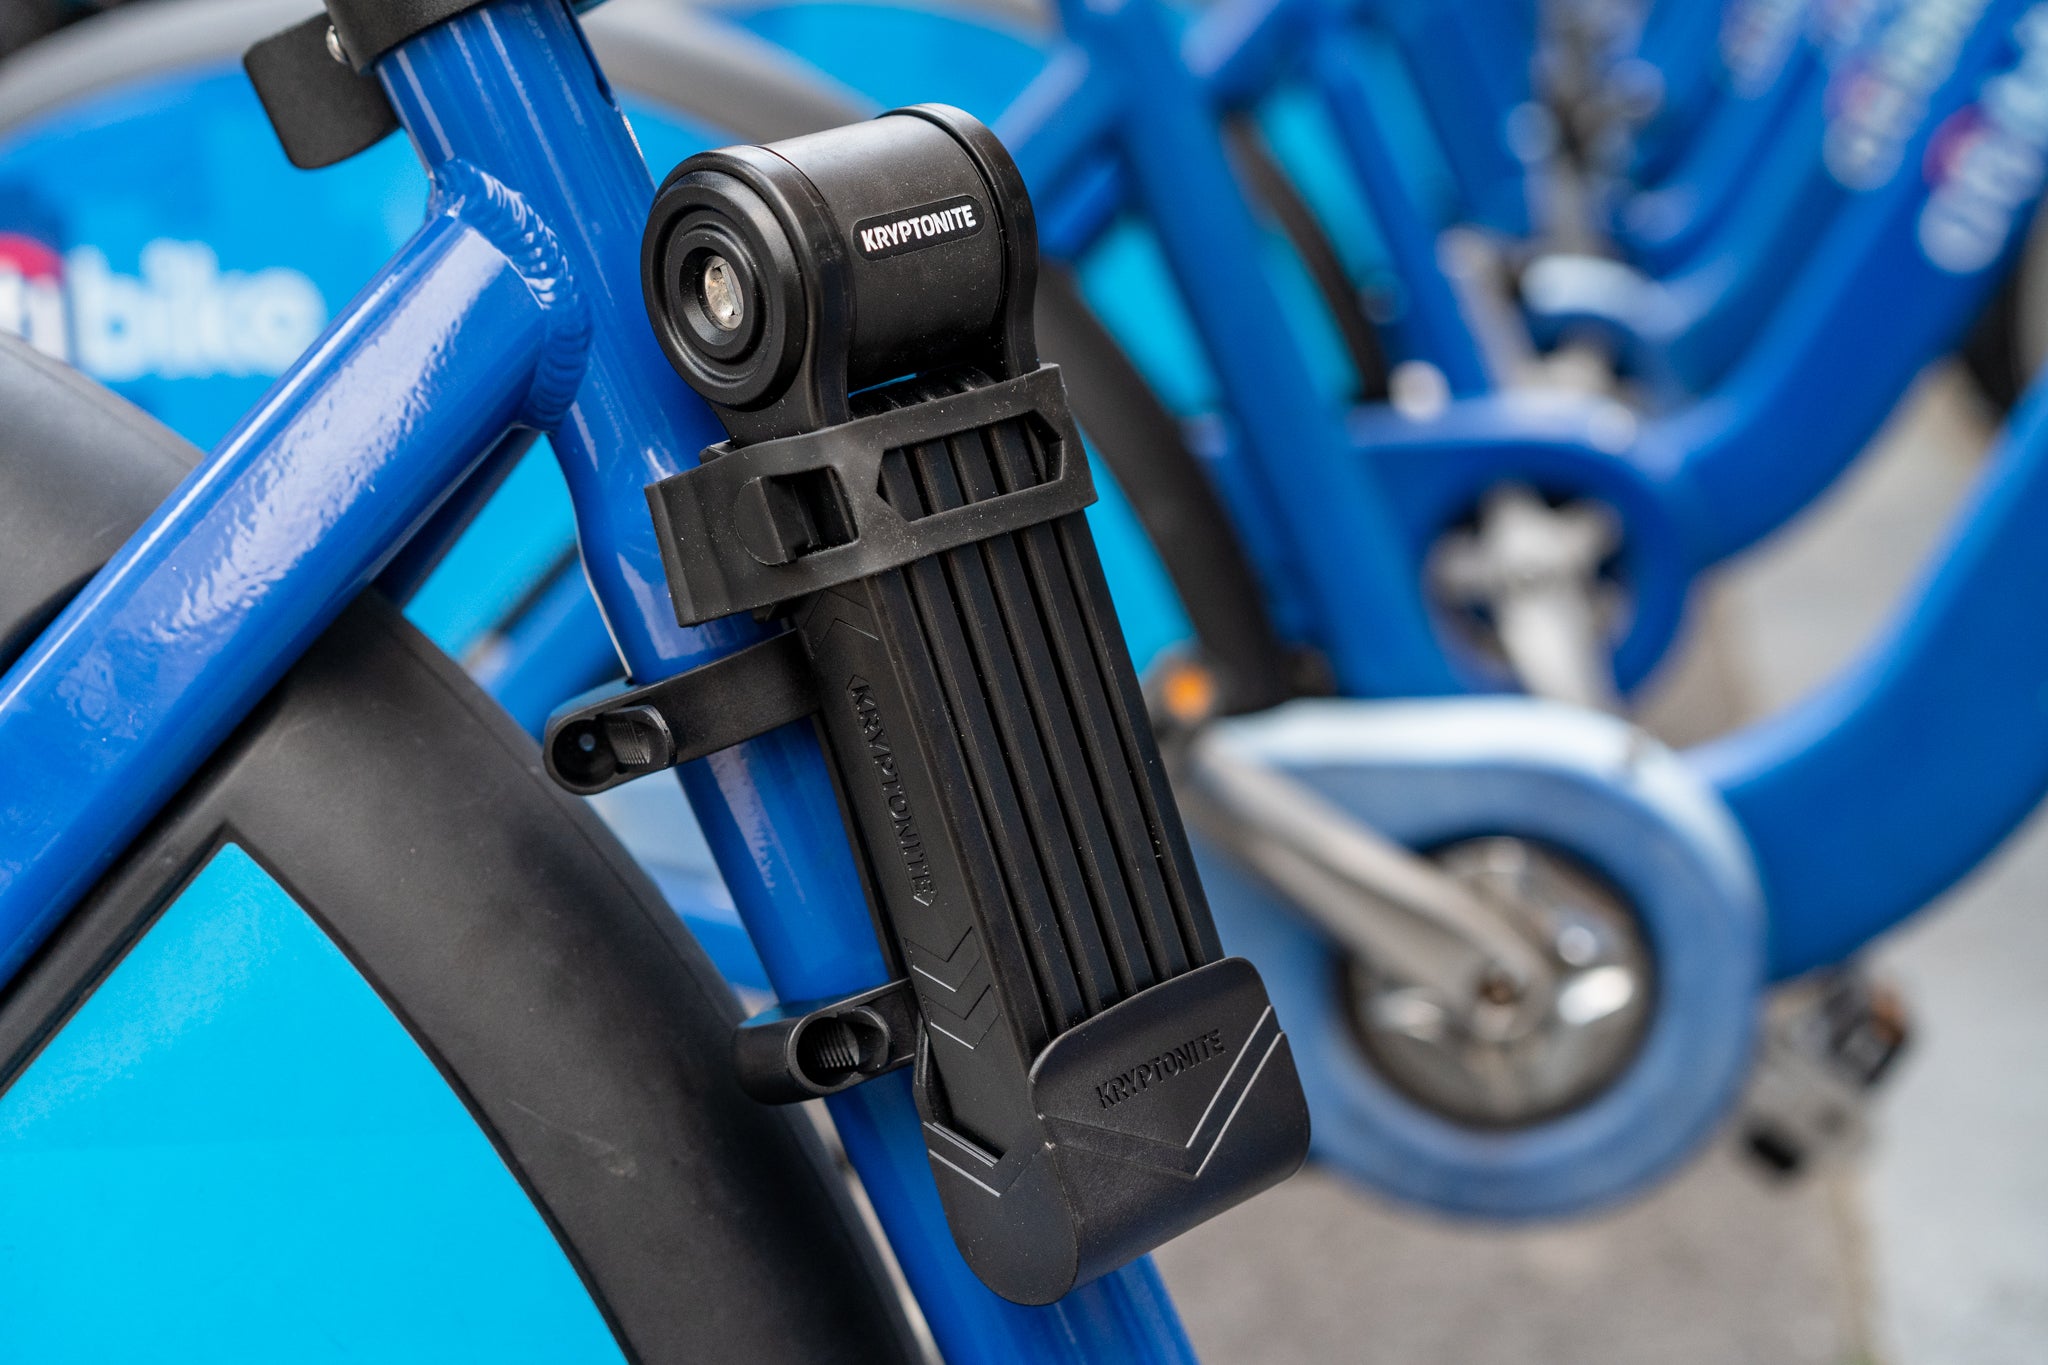 Bicycle Lock Review: Secure Your Ride with the Best Locks